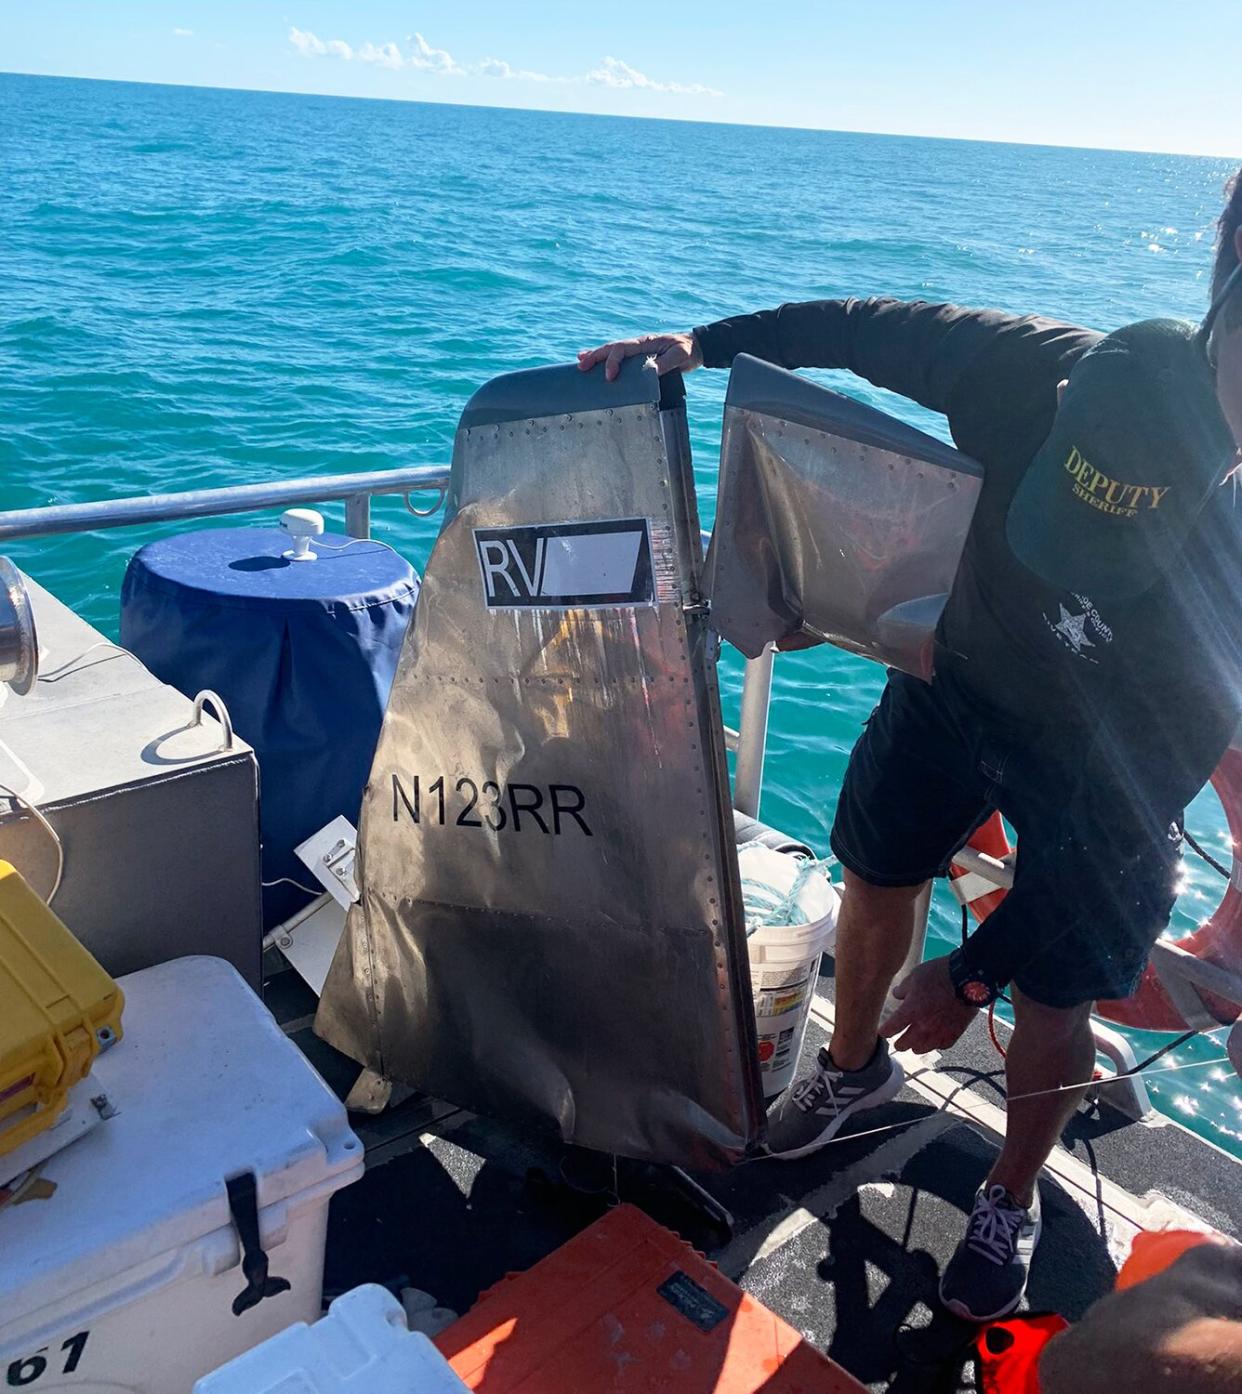 A Monroe County Sheriff's Office diver holds a piece of aircraft debris from the ocean floor 15 miles north of Big Pine Key, Florida, March 3, 2021. Coast Guard crews suspended the search March 3, 2021.